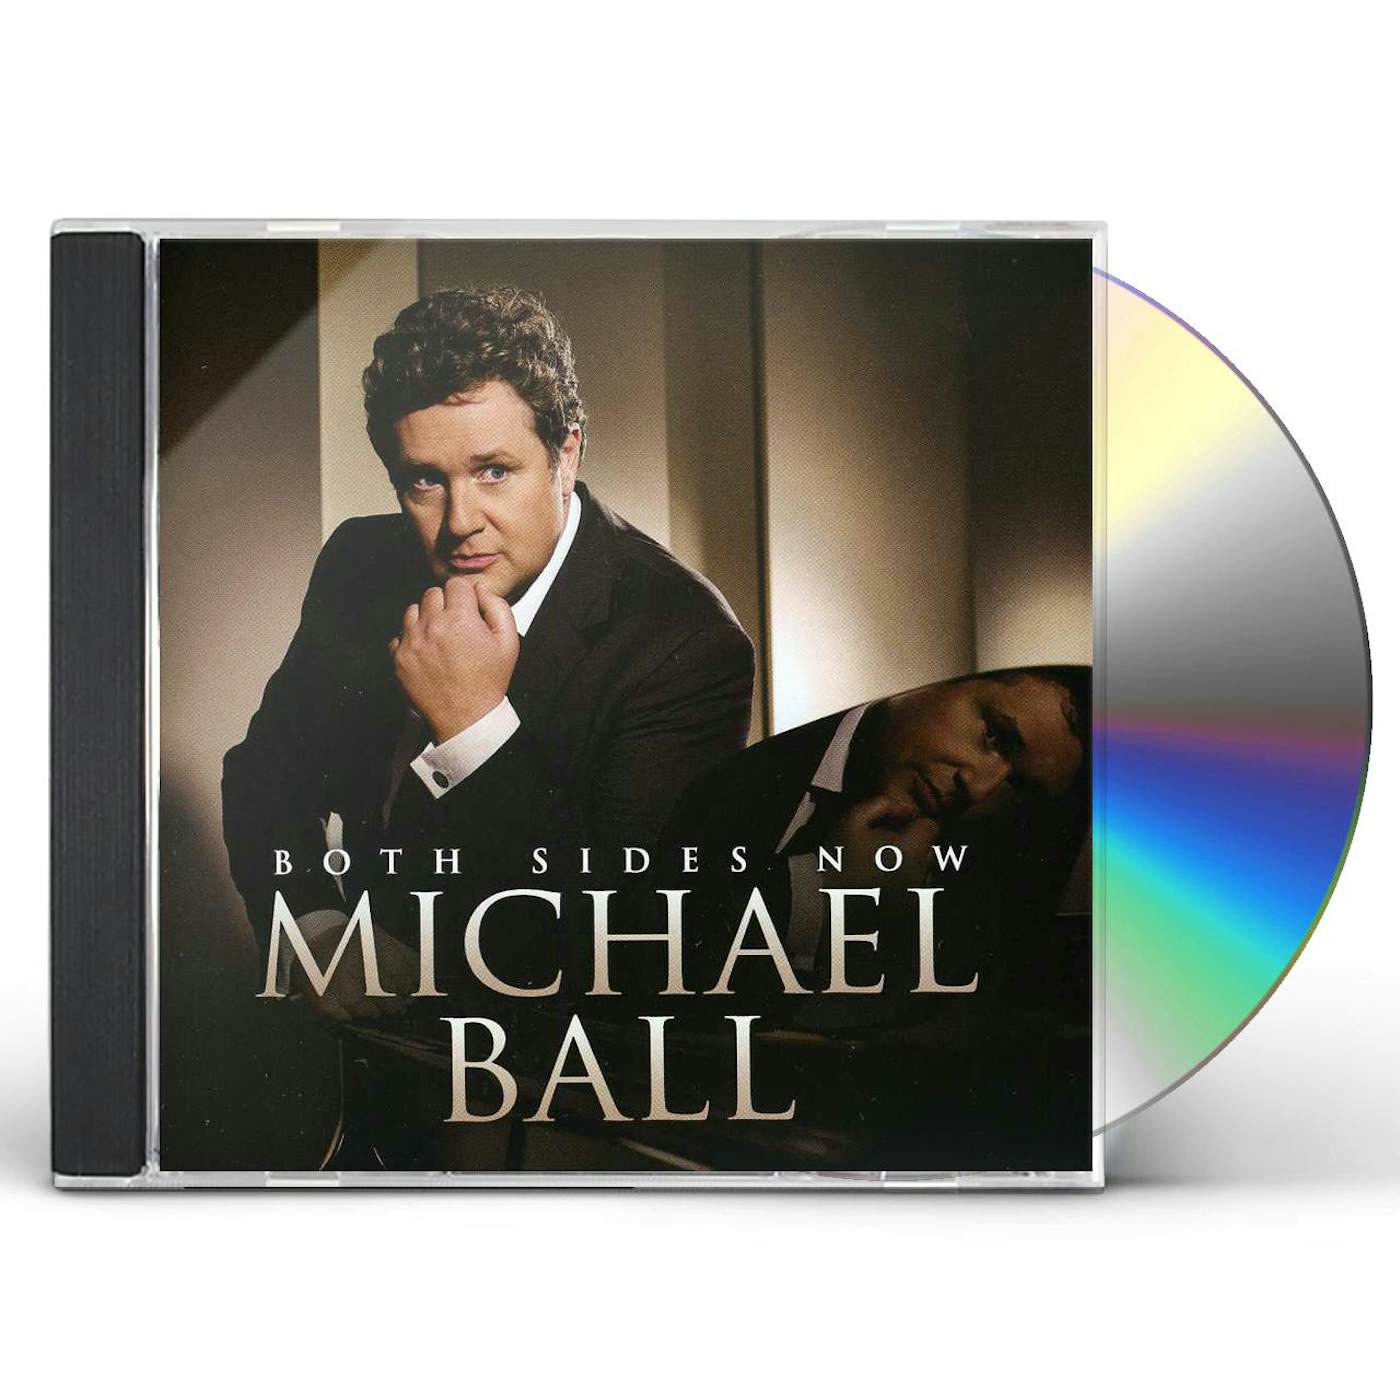 Michael Ball BOTH SIDES NOW CD